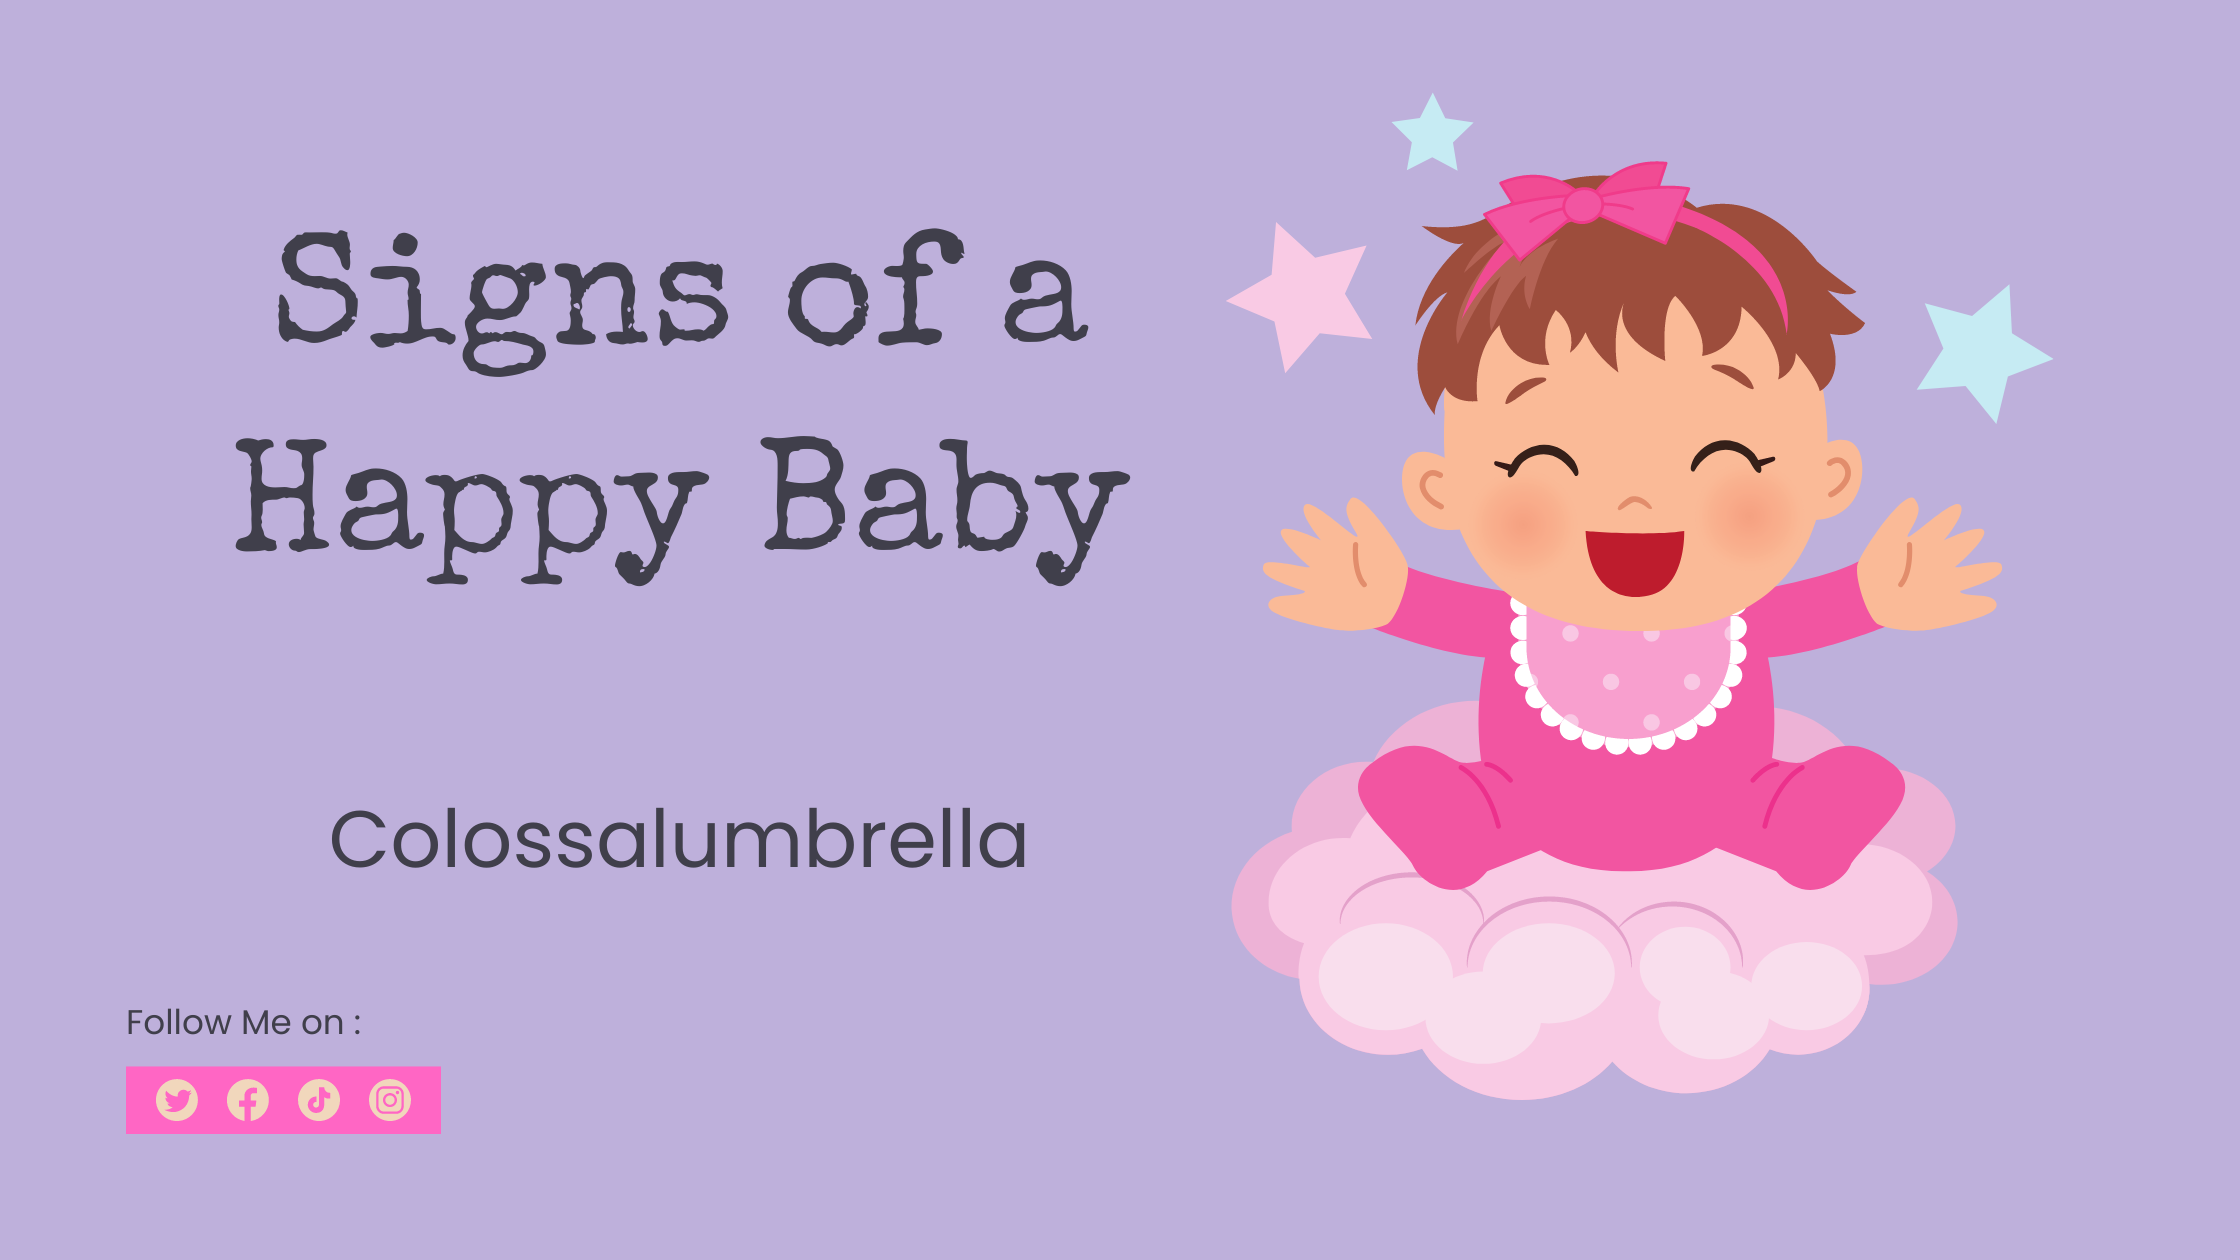 10 Clear Signs Your Baby Is Happy by Colossalumbrella